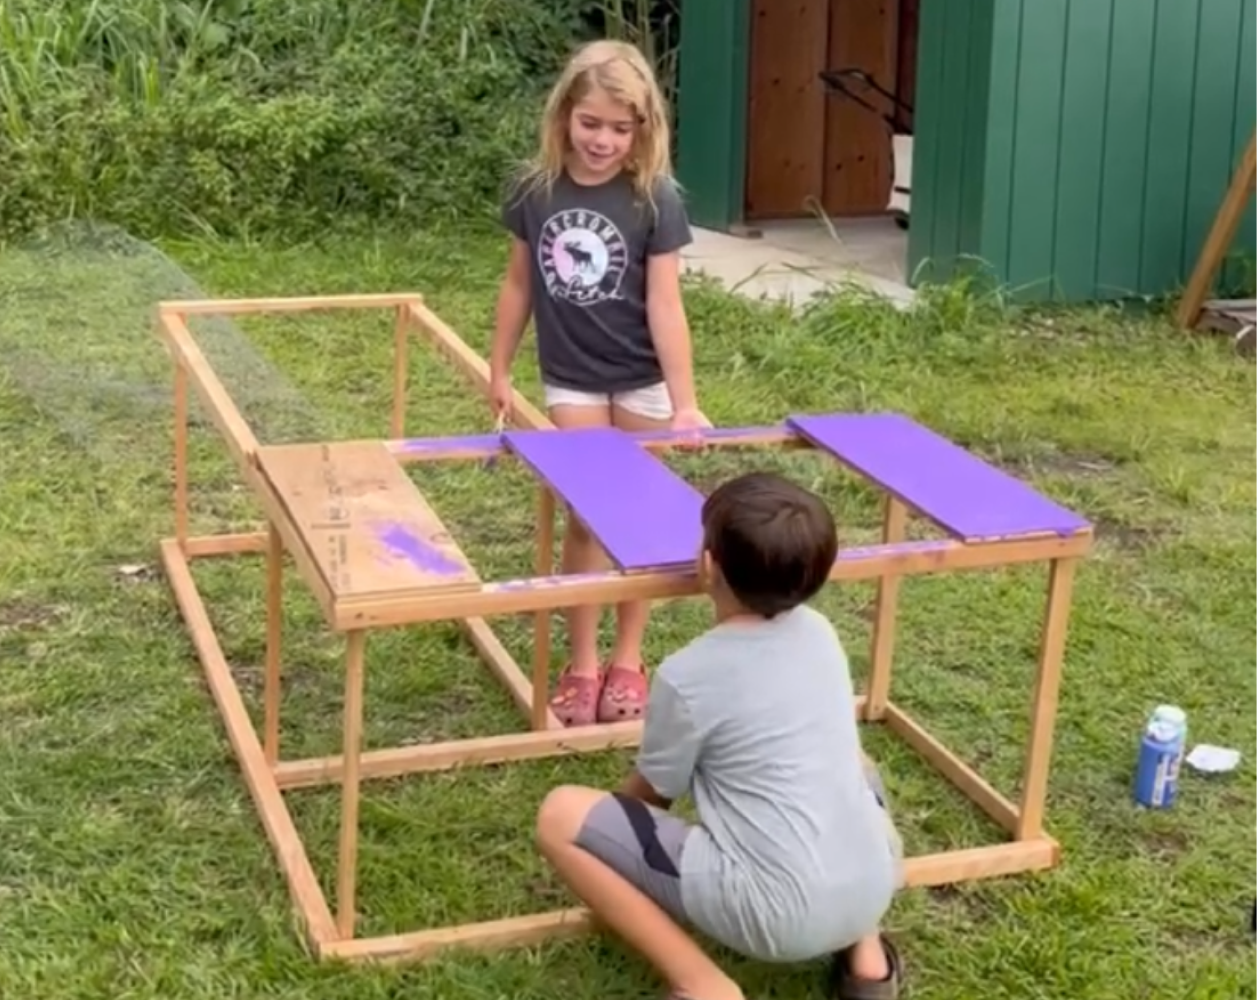 Two children assembling a wooden table outdoors.